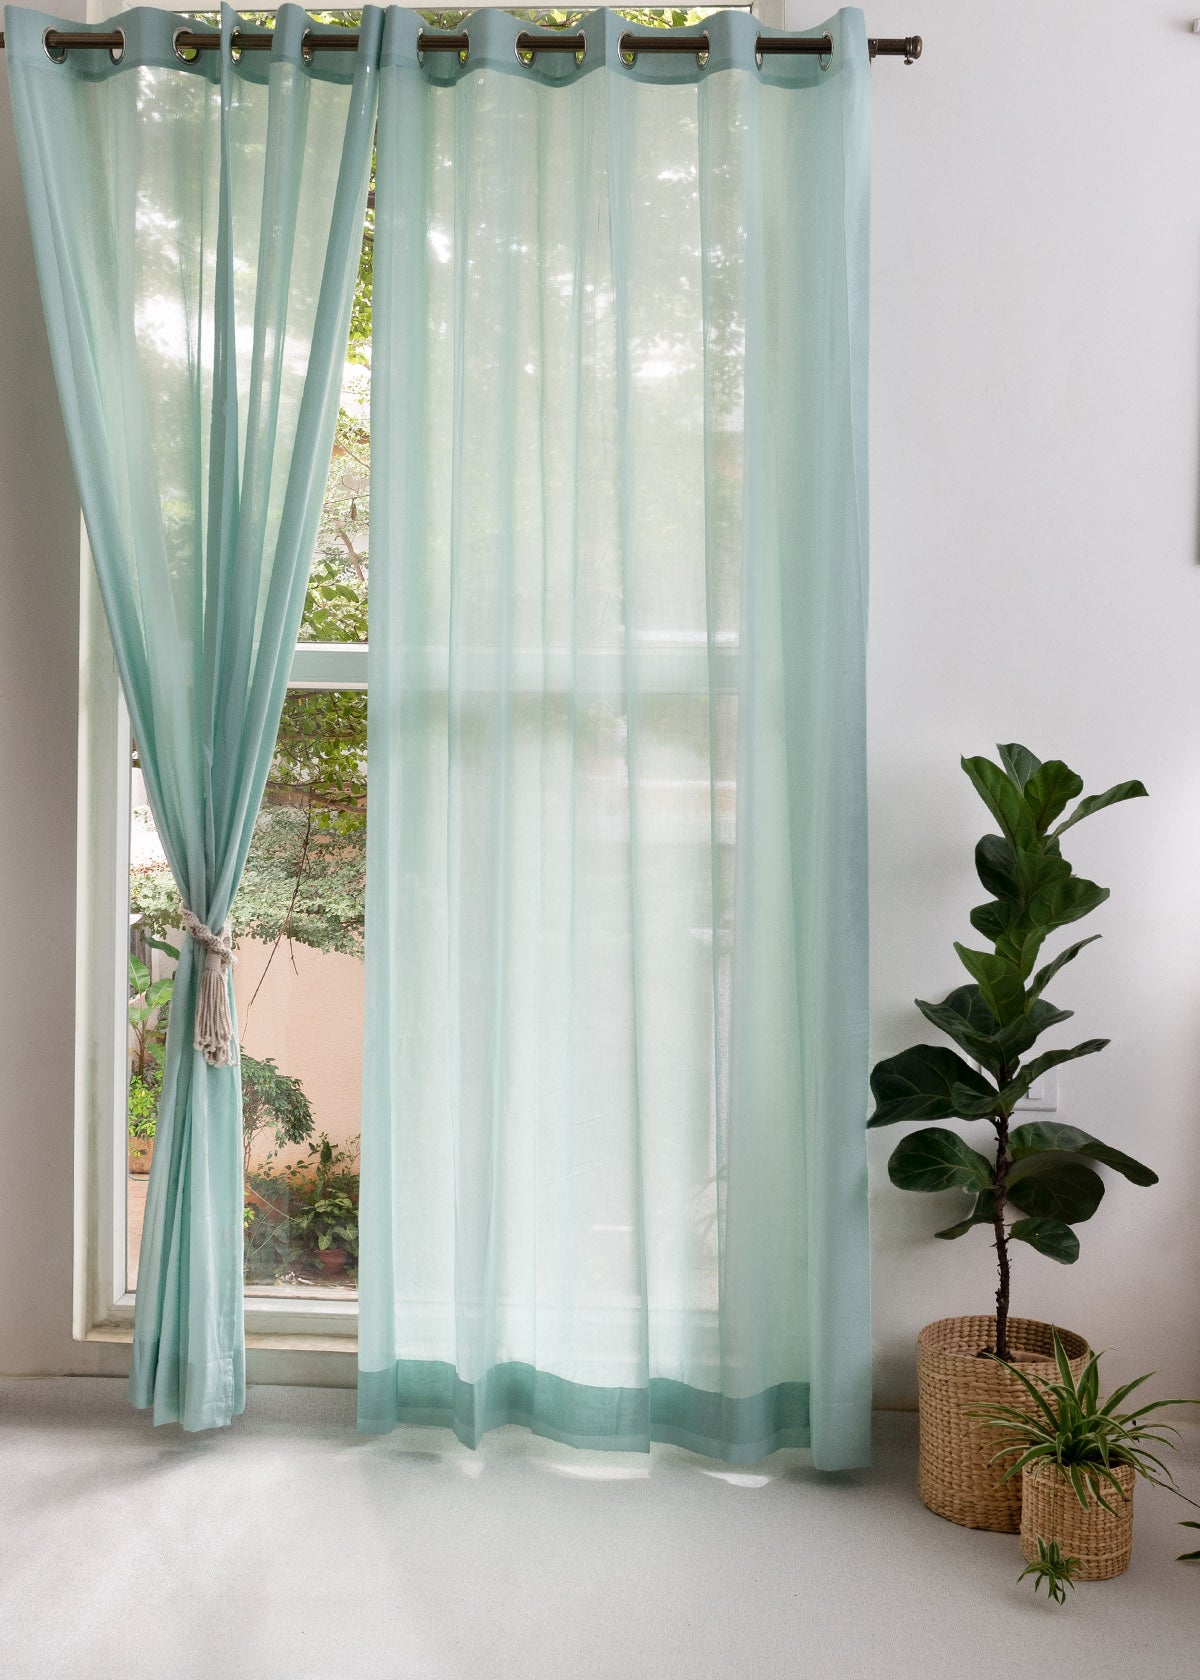 Solid Nile Blue sheer 100% cotton plain curtain for Living room & bedroom - Light filtering - Pack of 1